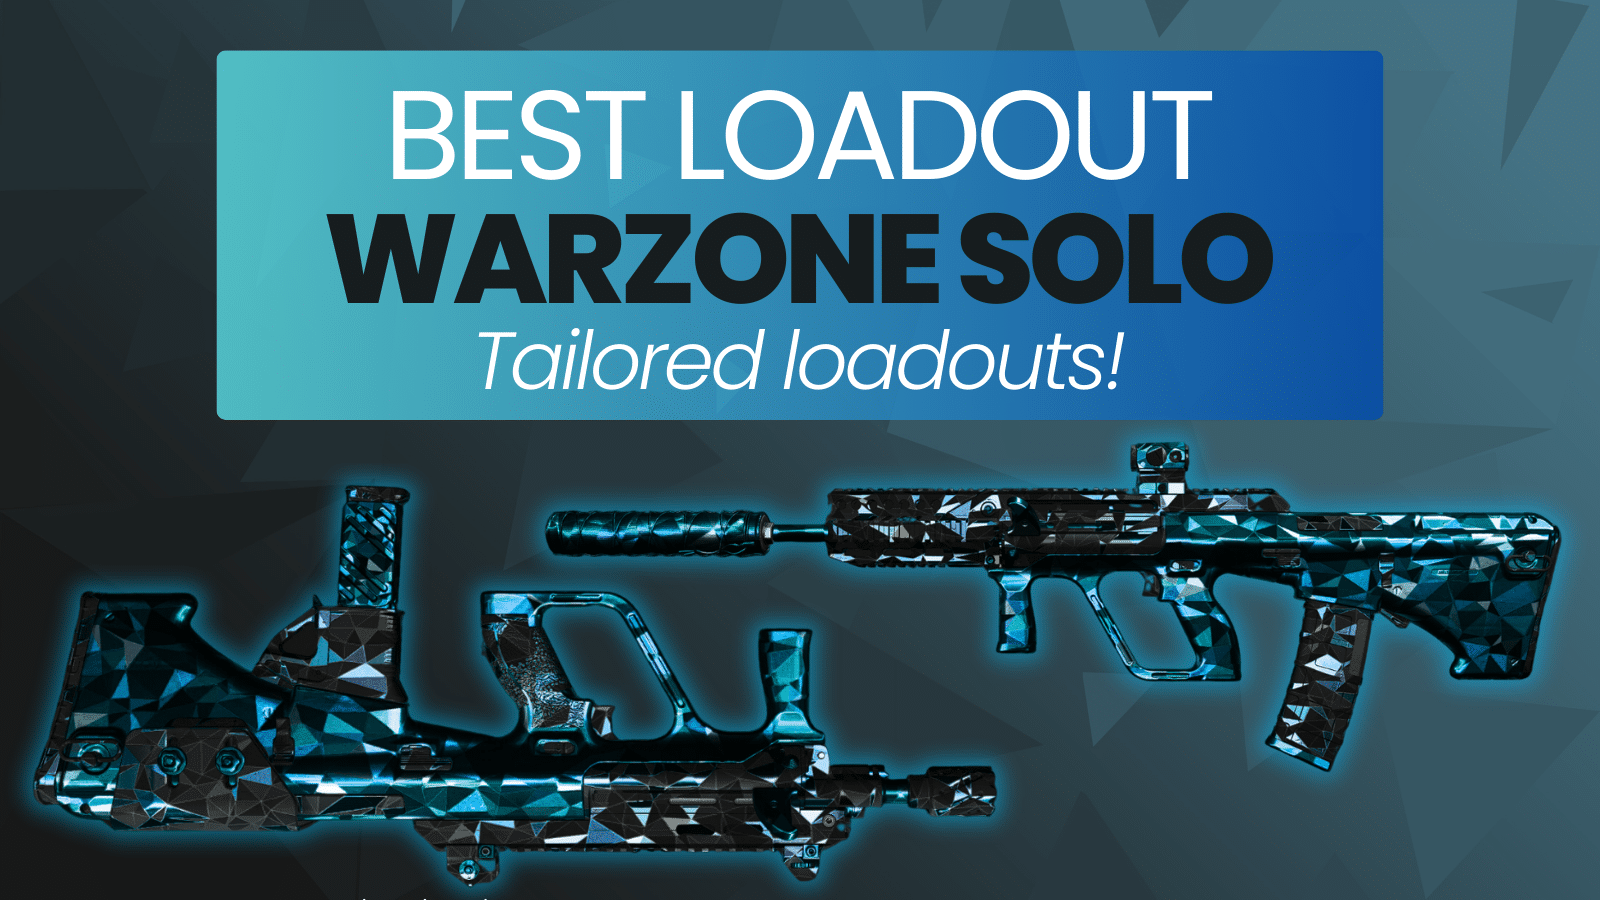 BEST META LOADOUTS FOR WARZONE SOLO – USE THESE TAILORED BUILDS NOW AND DOMINATE YOUR SOLO GAMES!